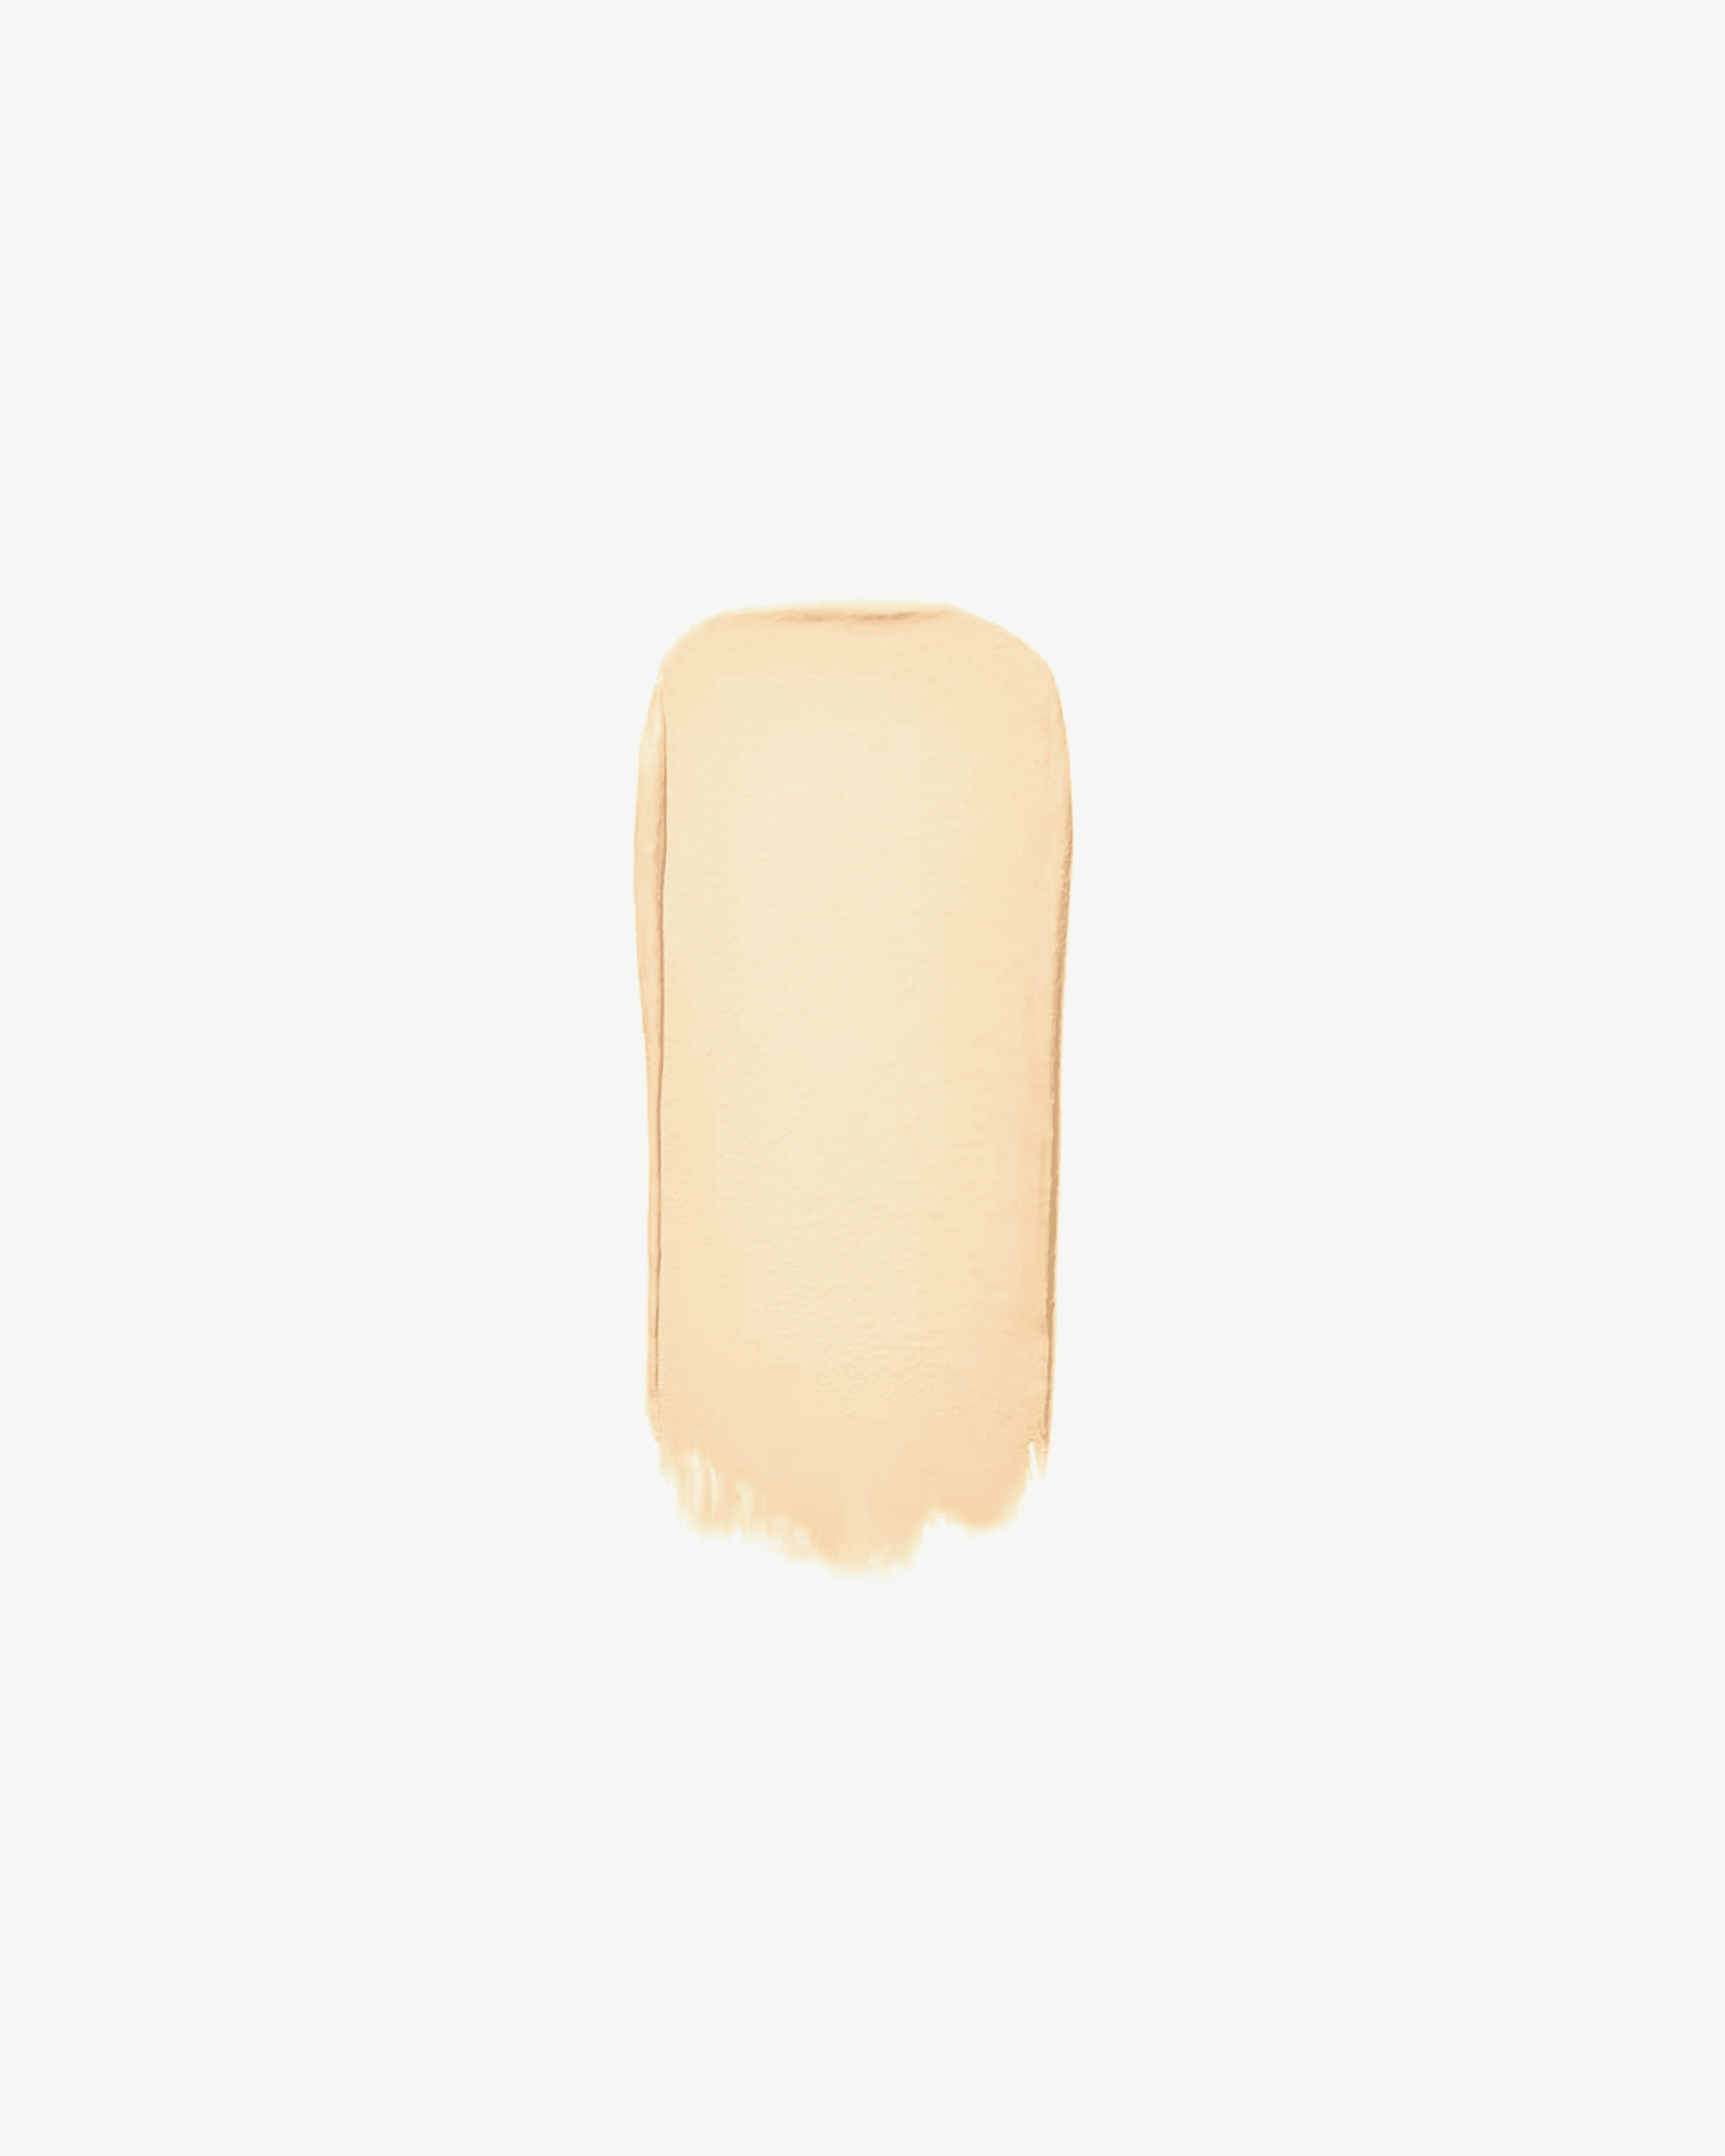 Shade 00 (for fair skin with neutral undertones)